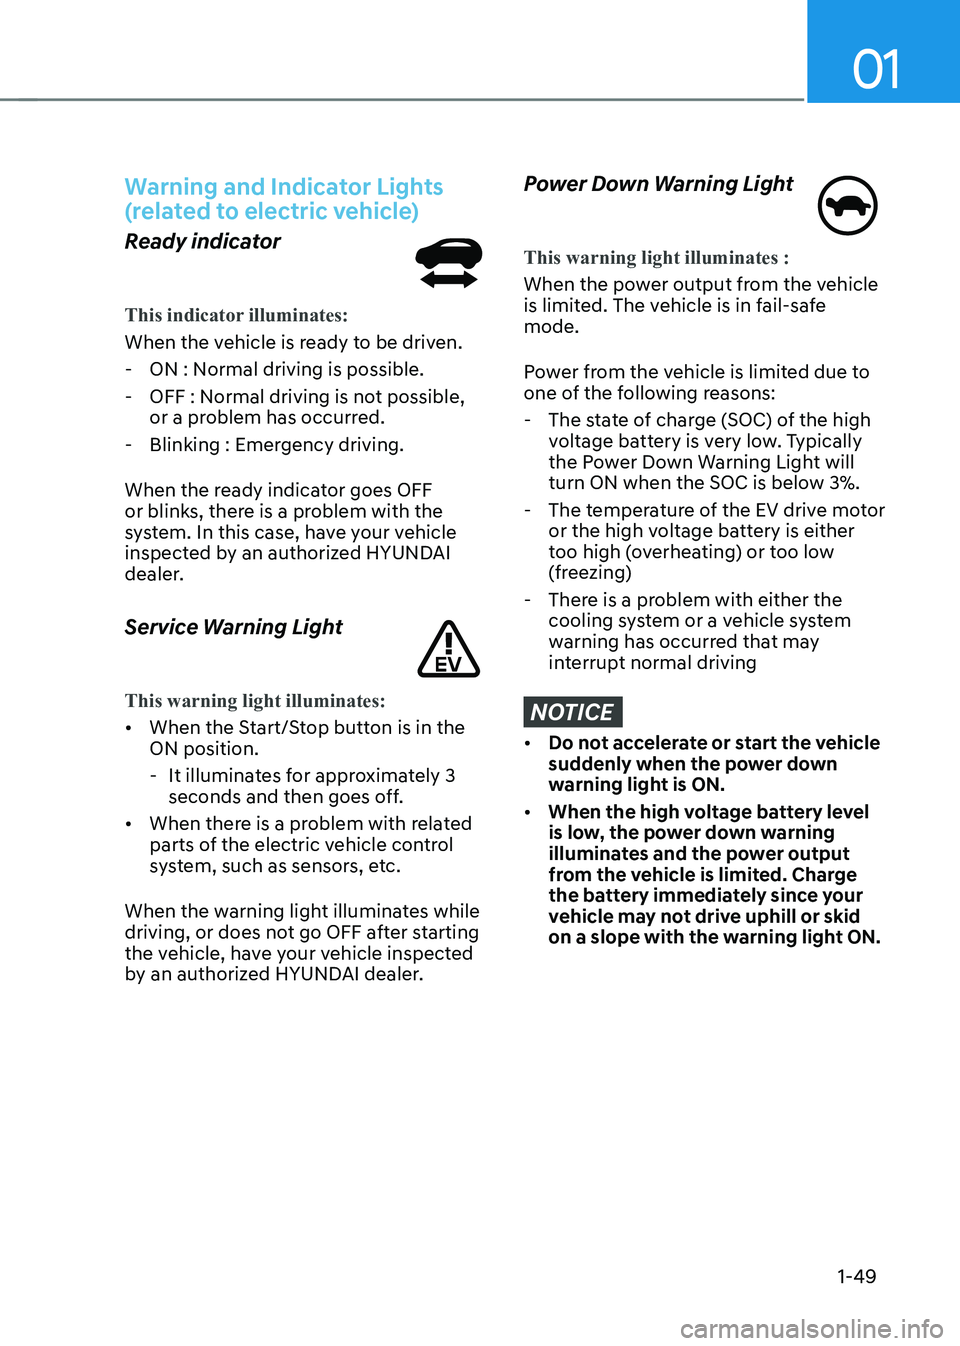 HYUNDAI KONA EV 2023  Owners Manual 01
1-49
Warning and Indicator Lights  
(related to electric vehicle)
Ready indicator
This indicator illuminates:
When the vehicle is ready to be driven. - ON : Normal driving is possible. 
 - OFF : No